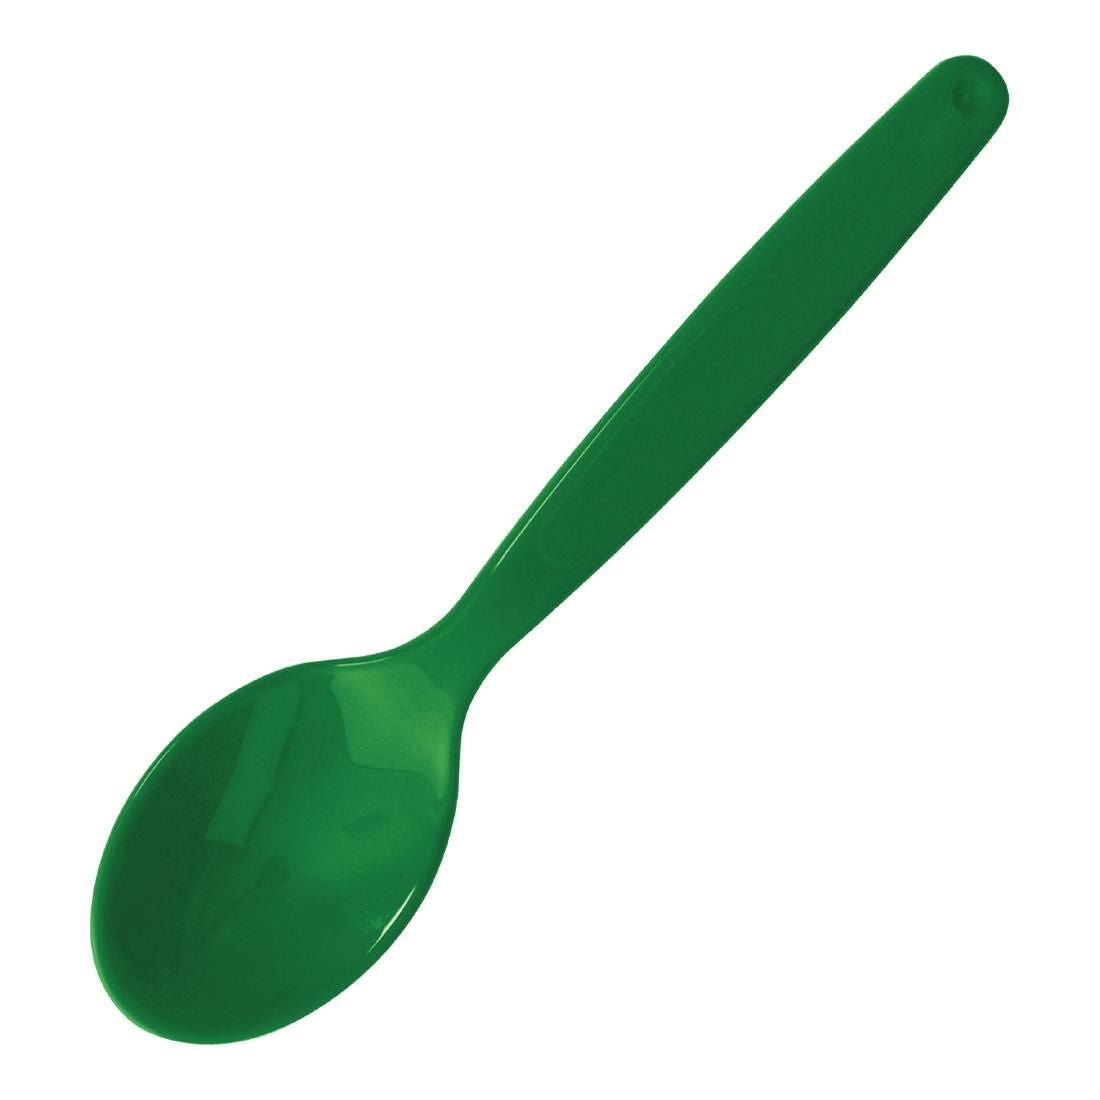 DL124 Polycarbonate Spoon Green Kristallon (Pack of 12) JD Catering Equipment Solutions Ltd